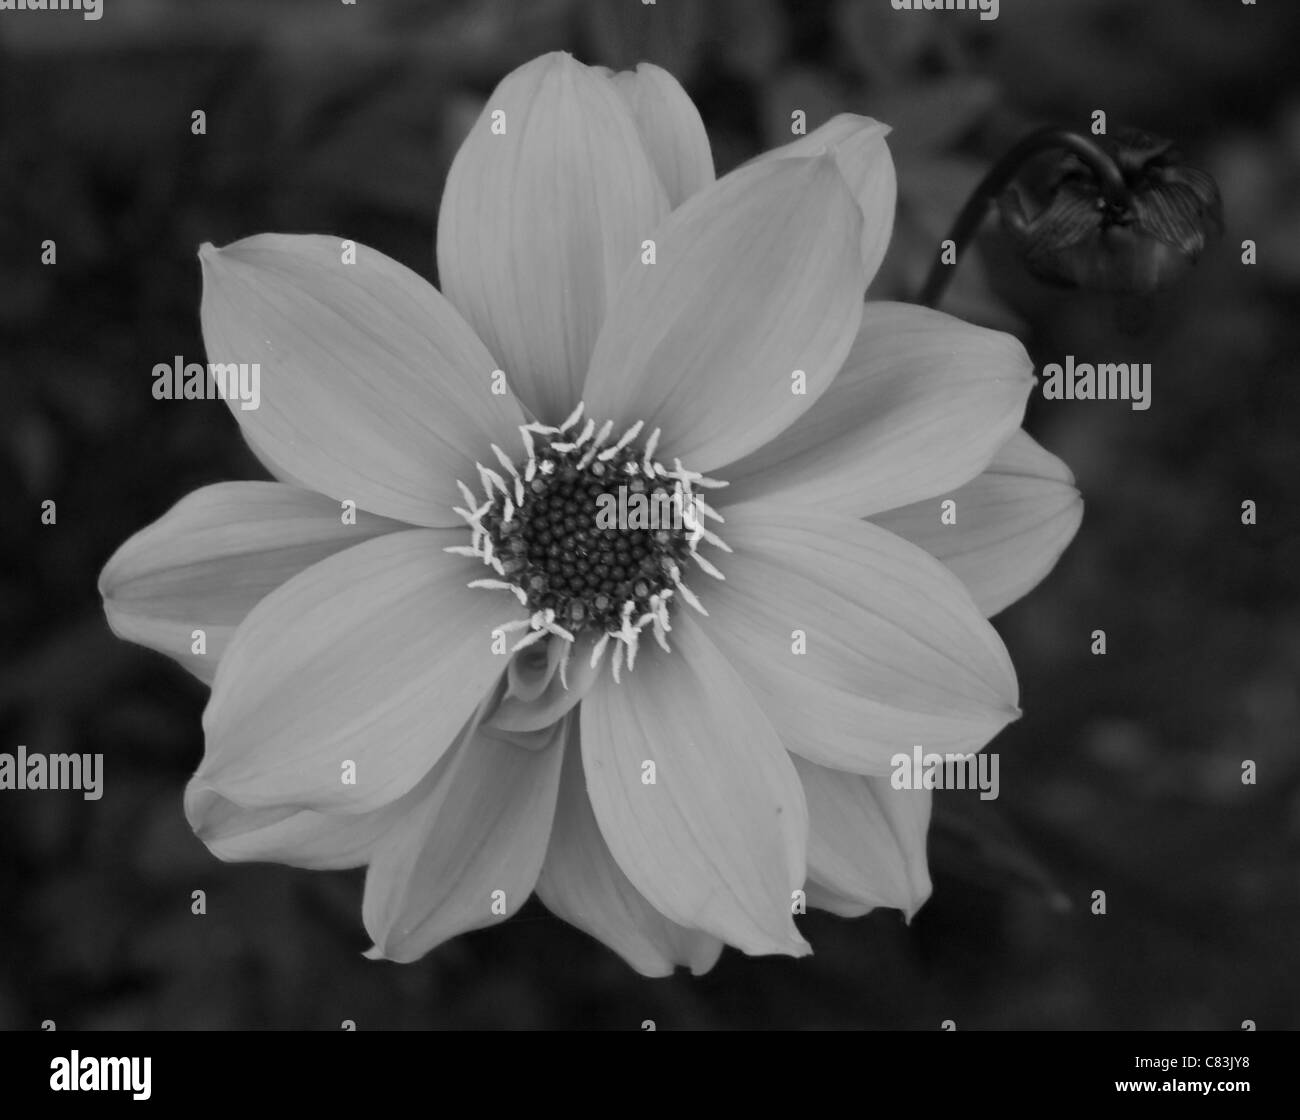 Red Dahlia image digitally altered to give a different concept .A monochromatic picture with the petals a light shade of grey Stock Photo